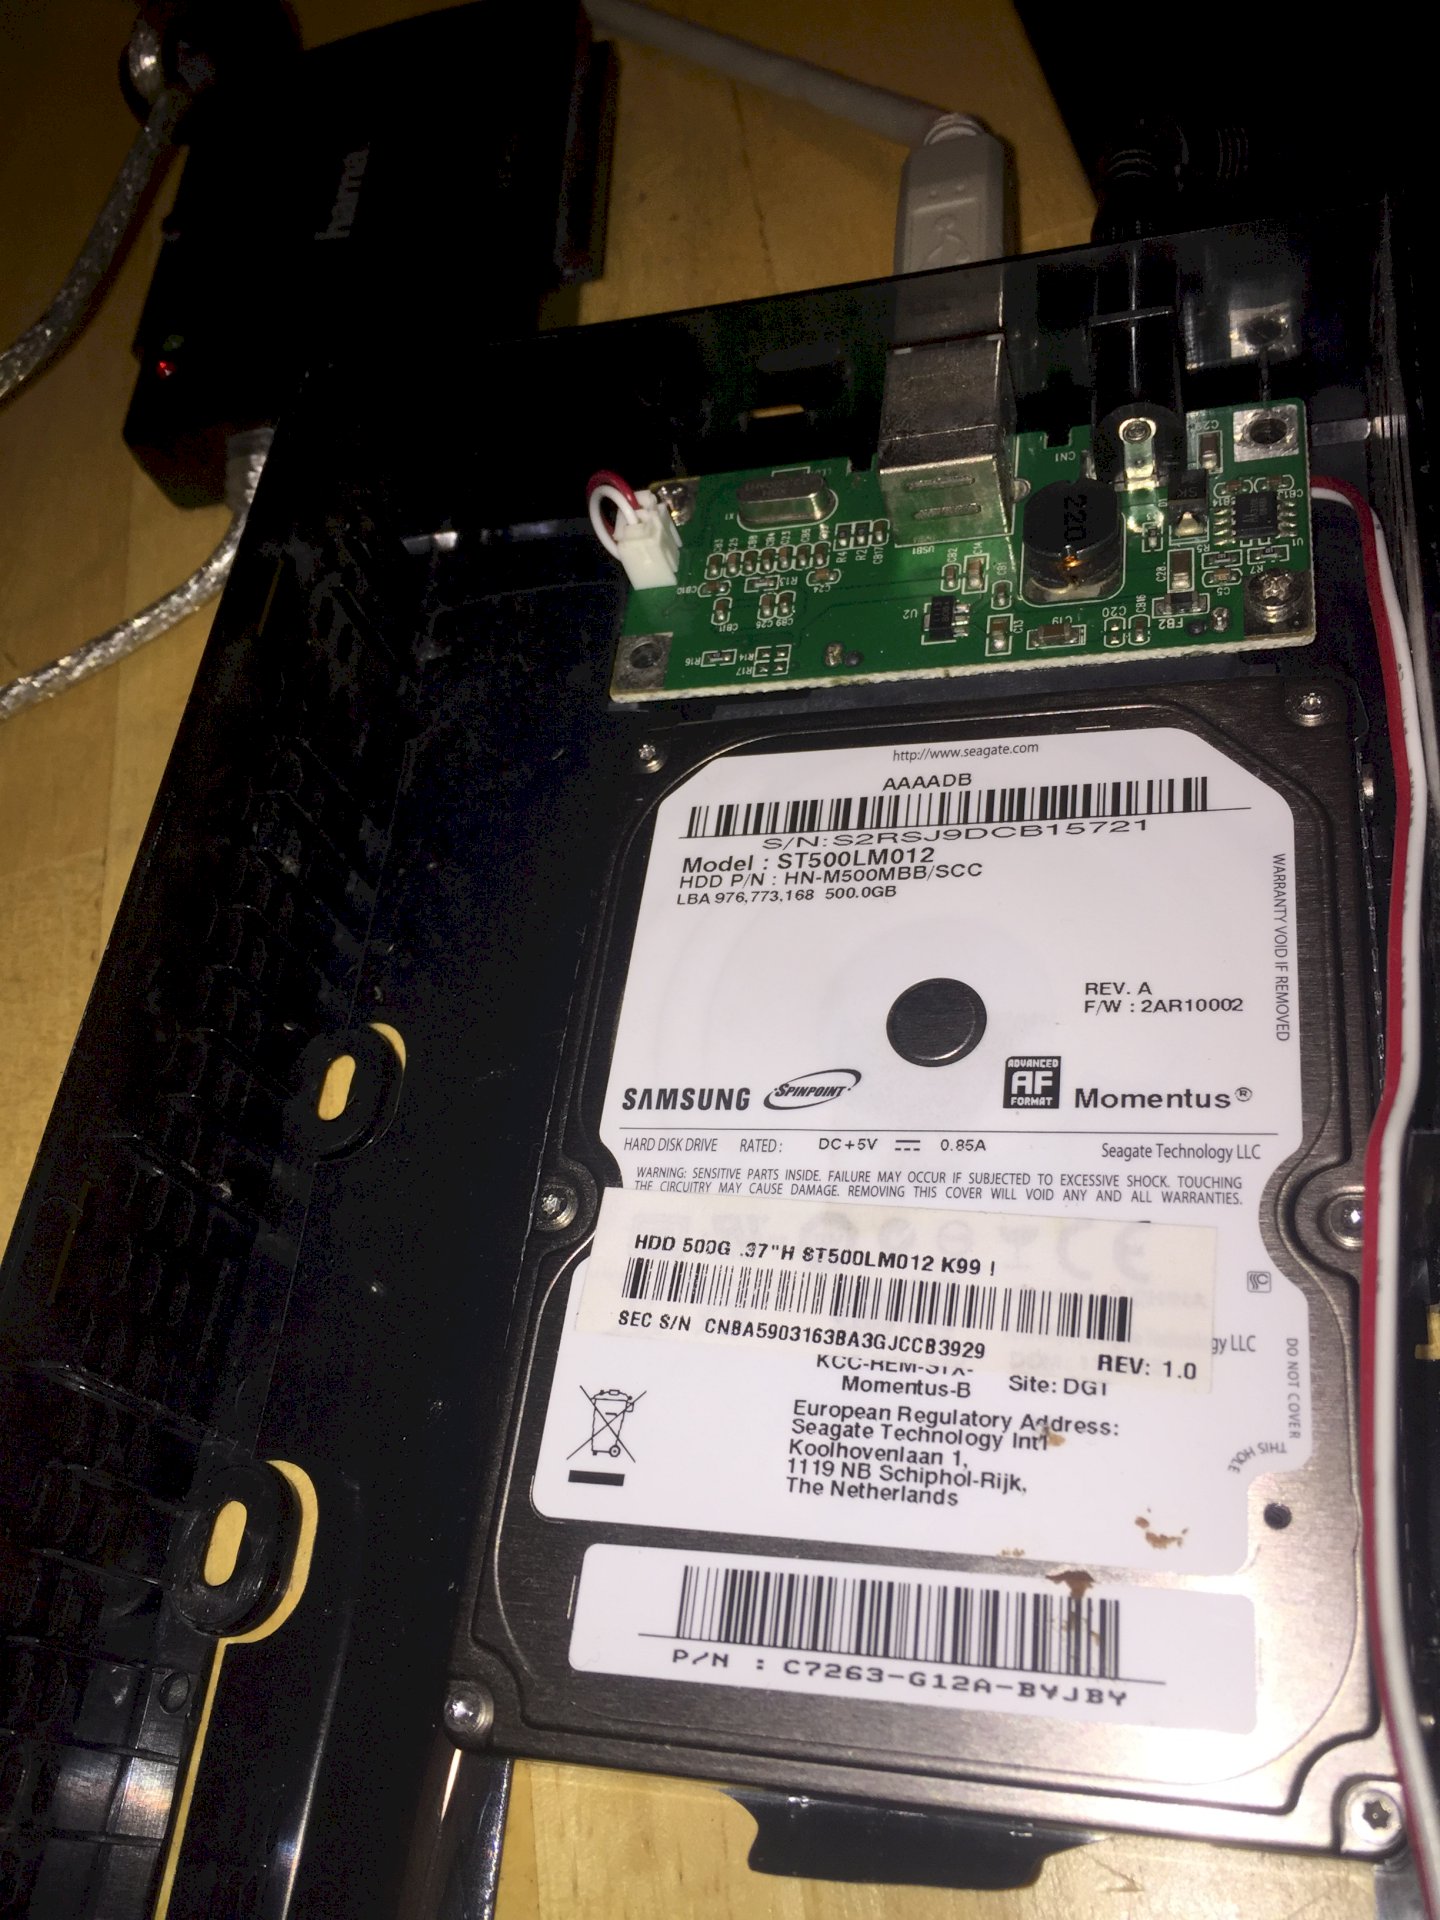 Internal hard drive is not recognized externally - 1